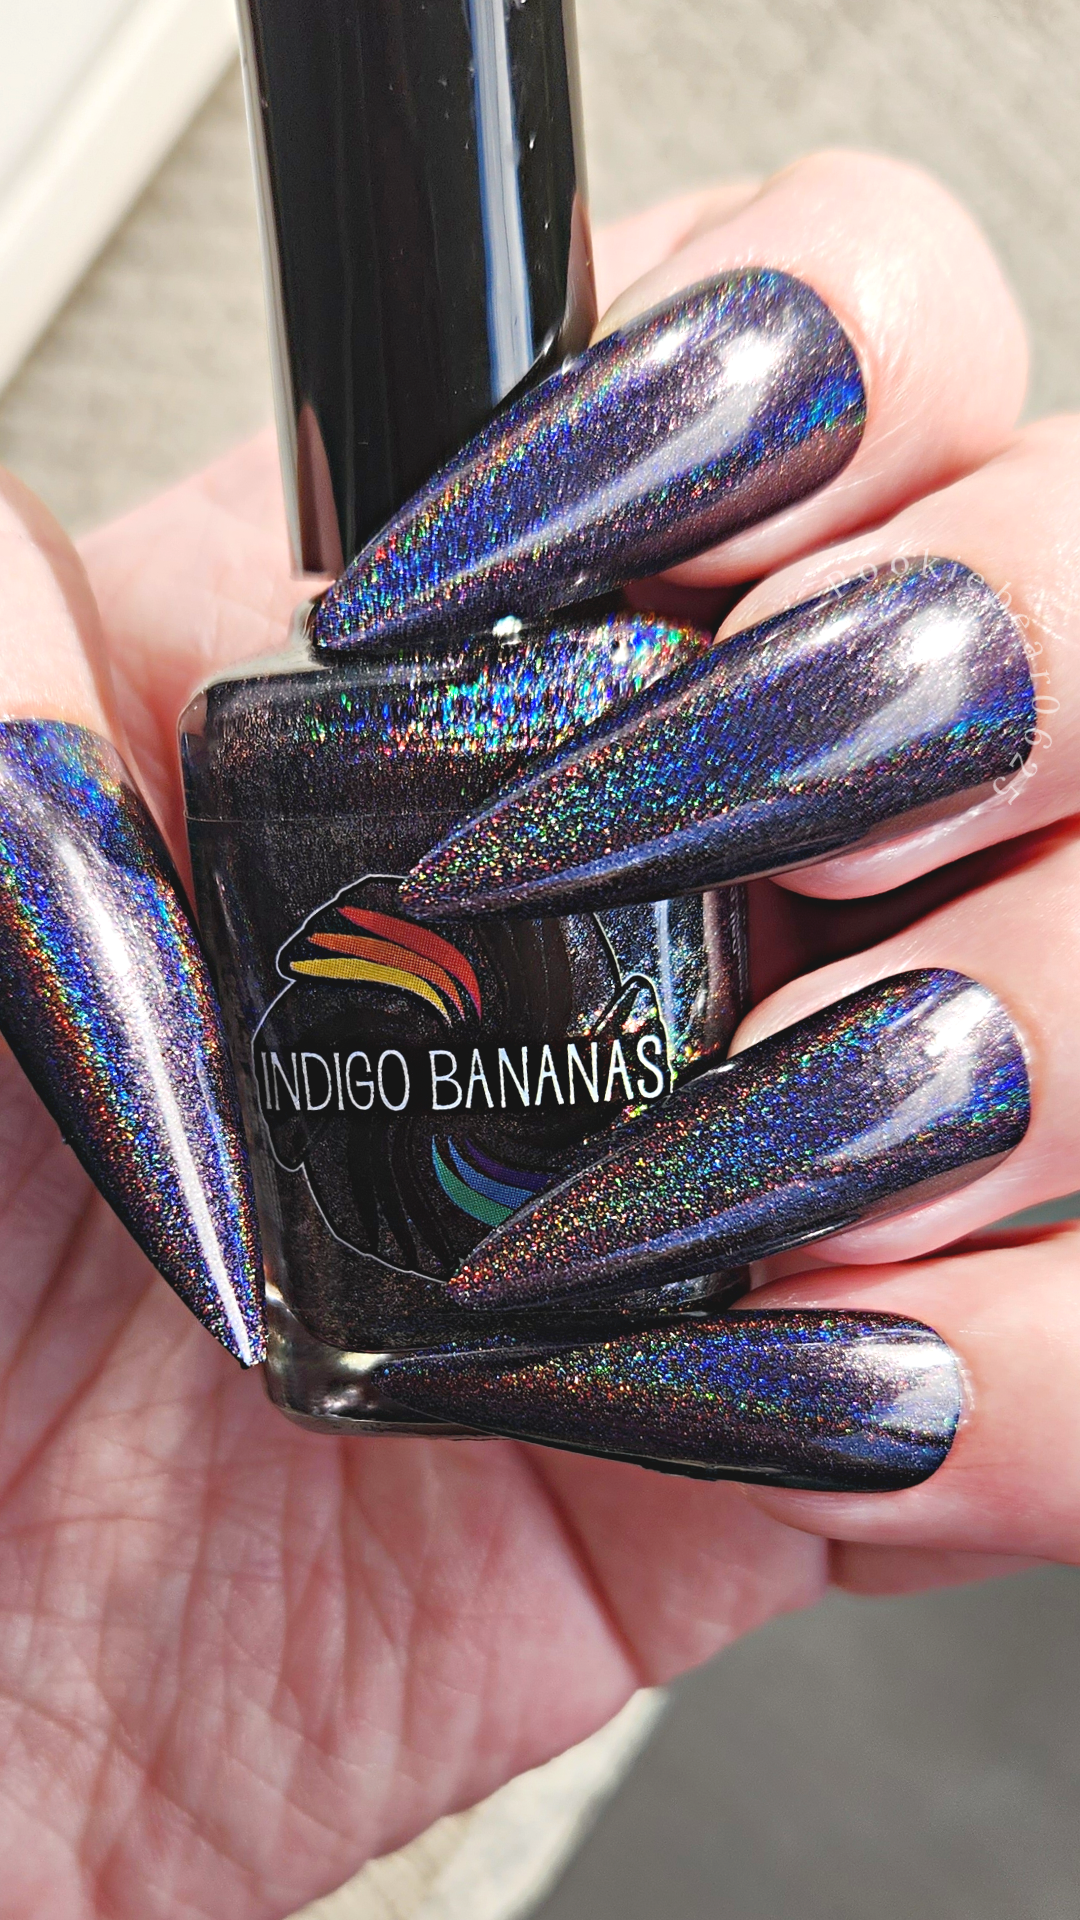 Chaos is a Ladder - eggplant / dark purple linear holographic